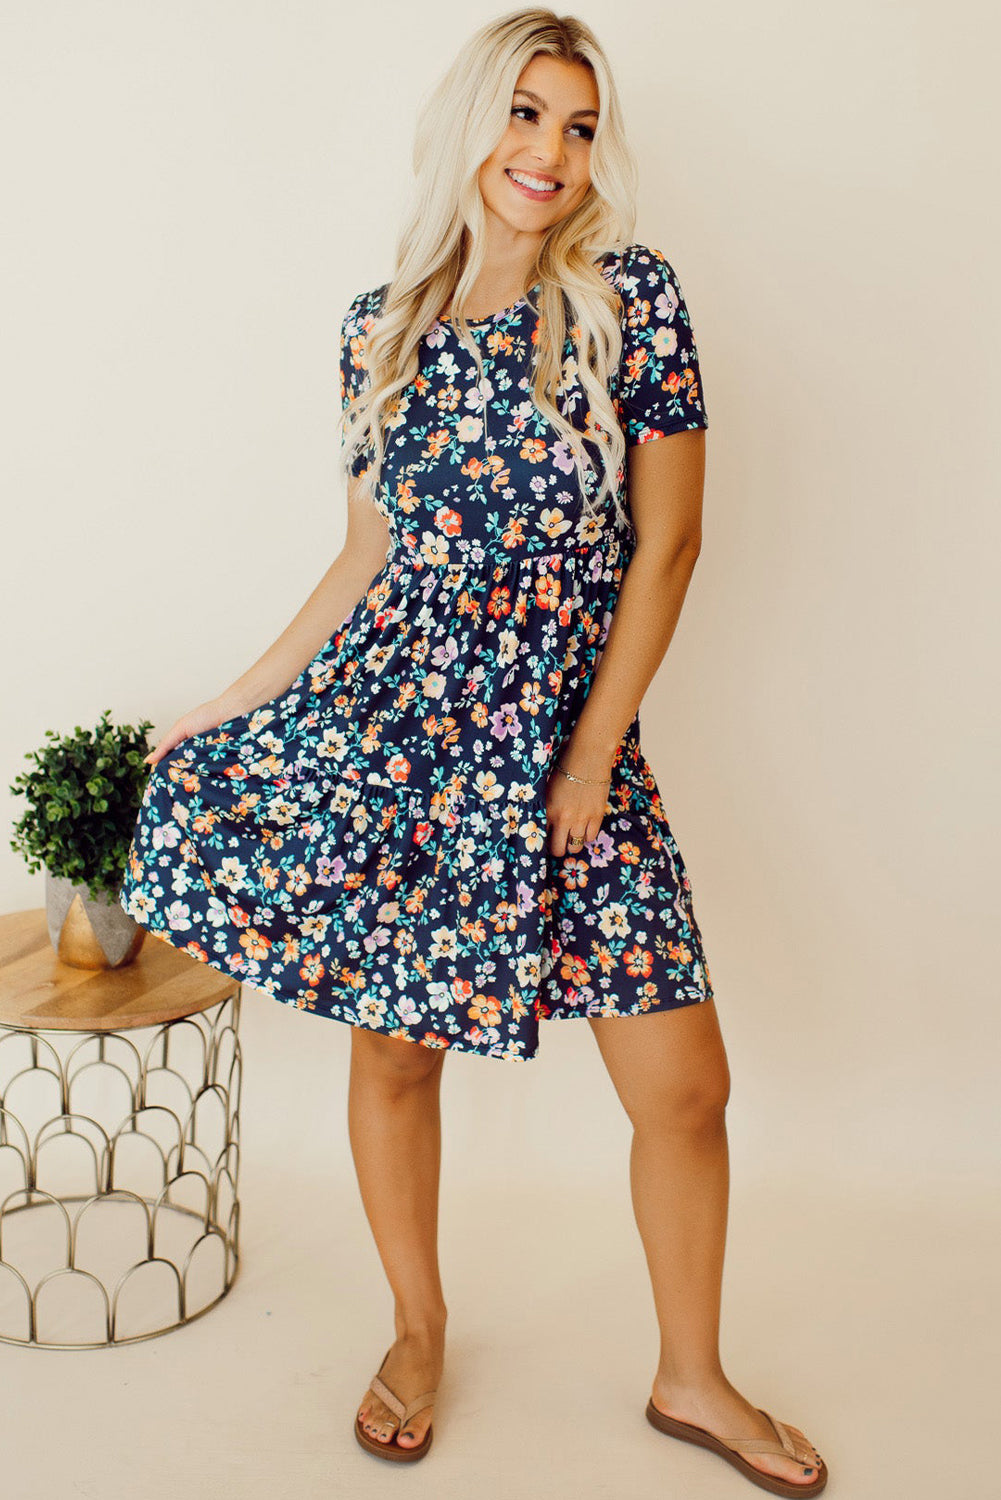 Floral printed short dress with round neck and ruffle skirt.